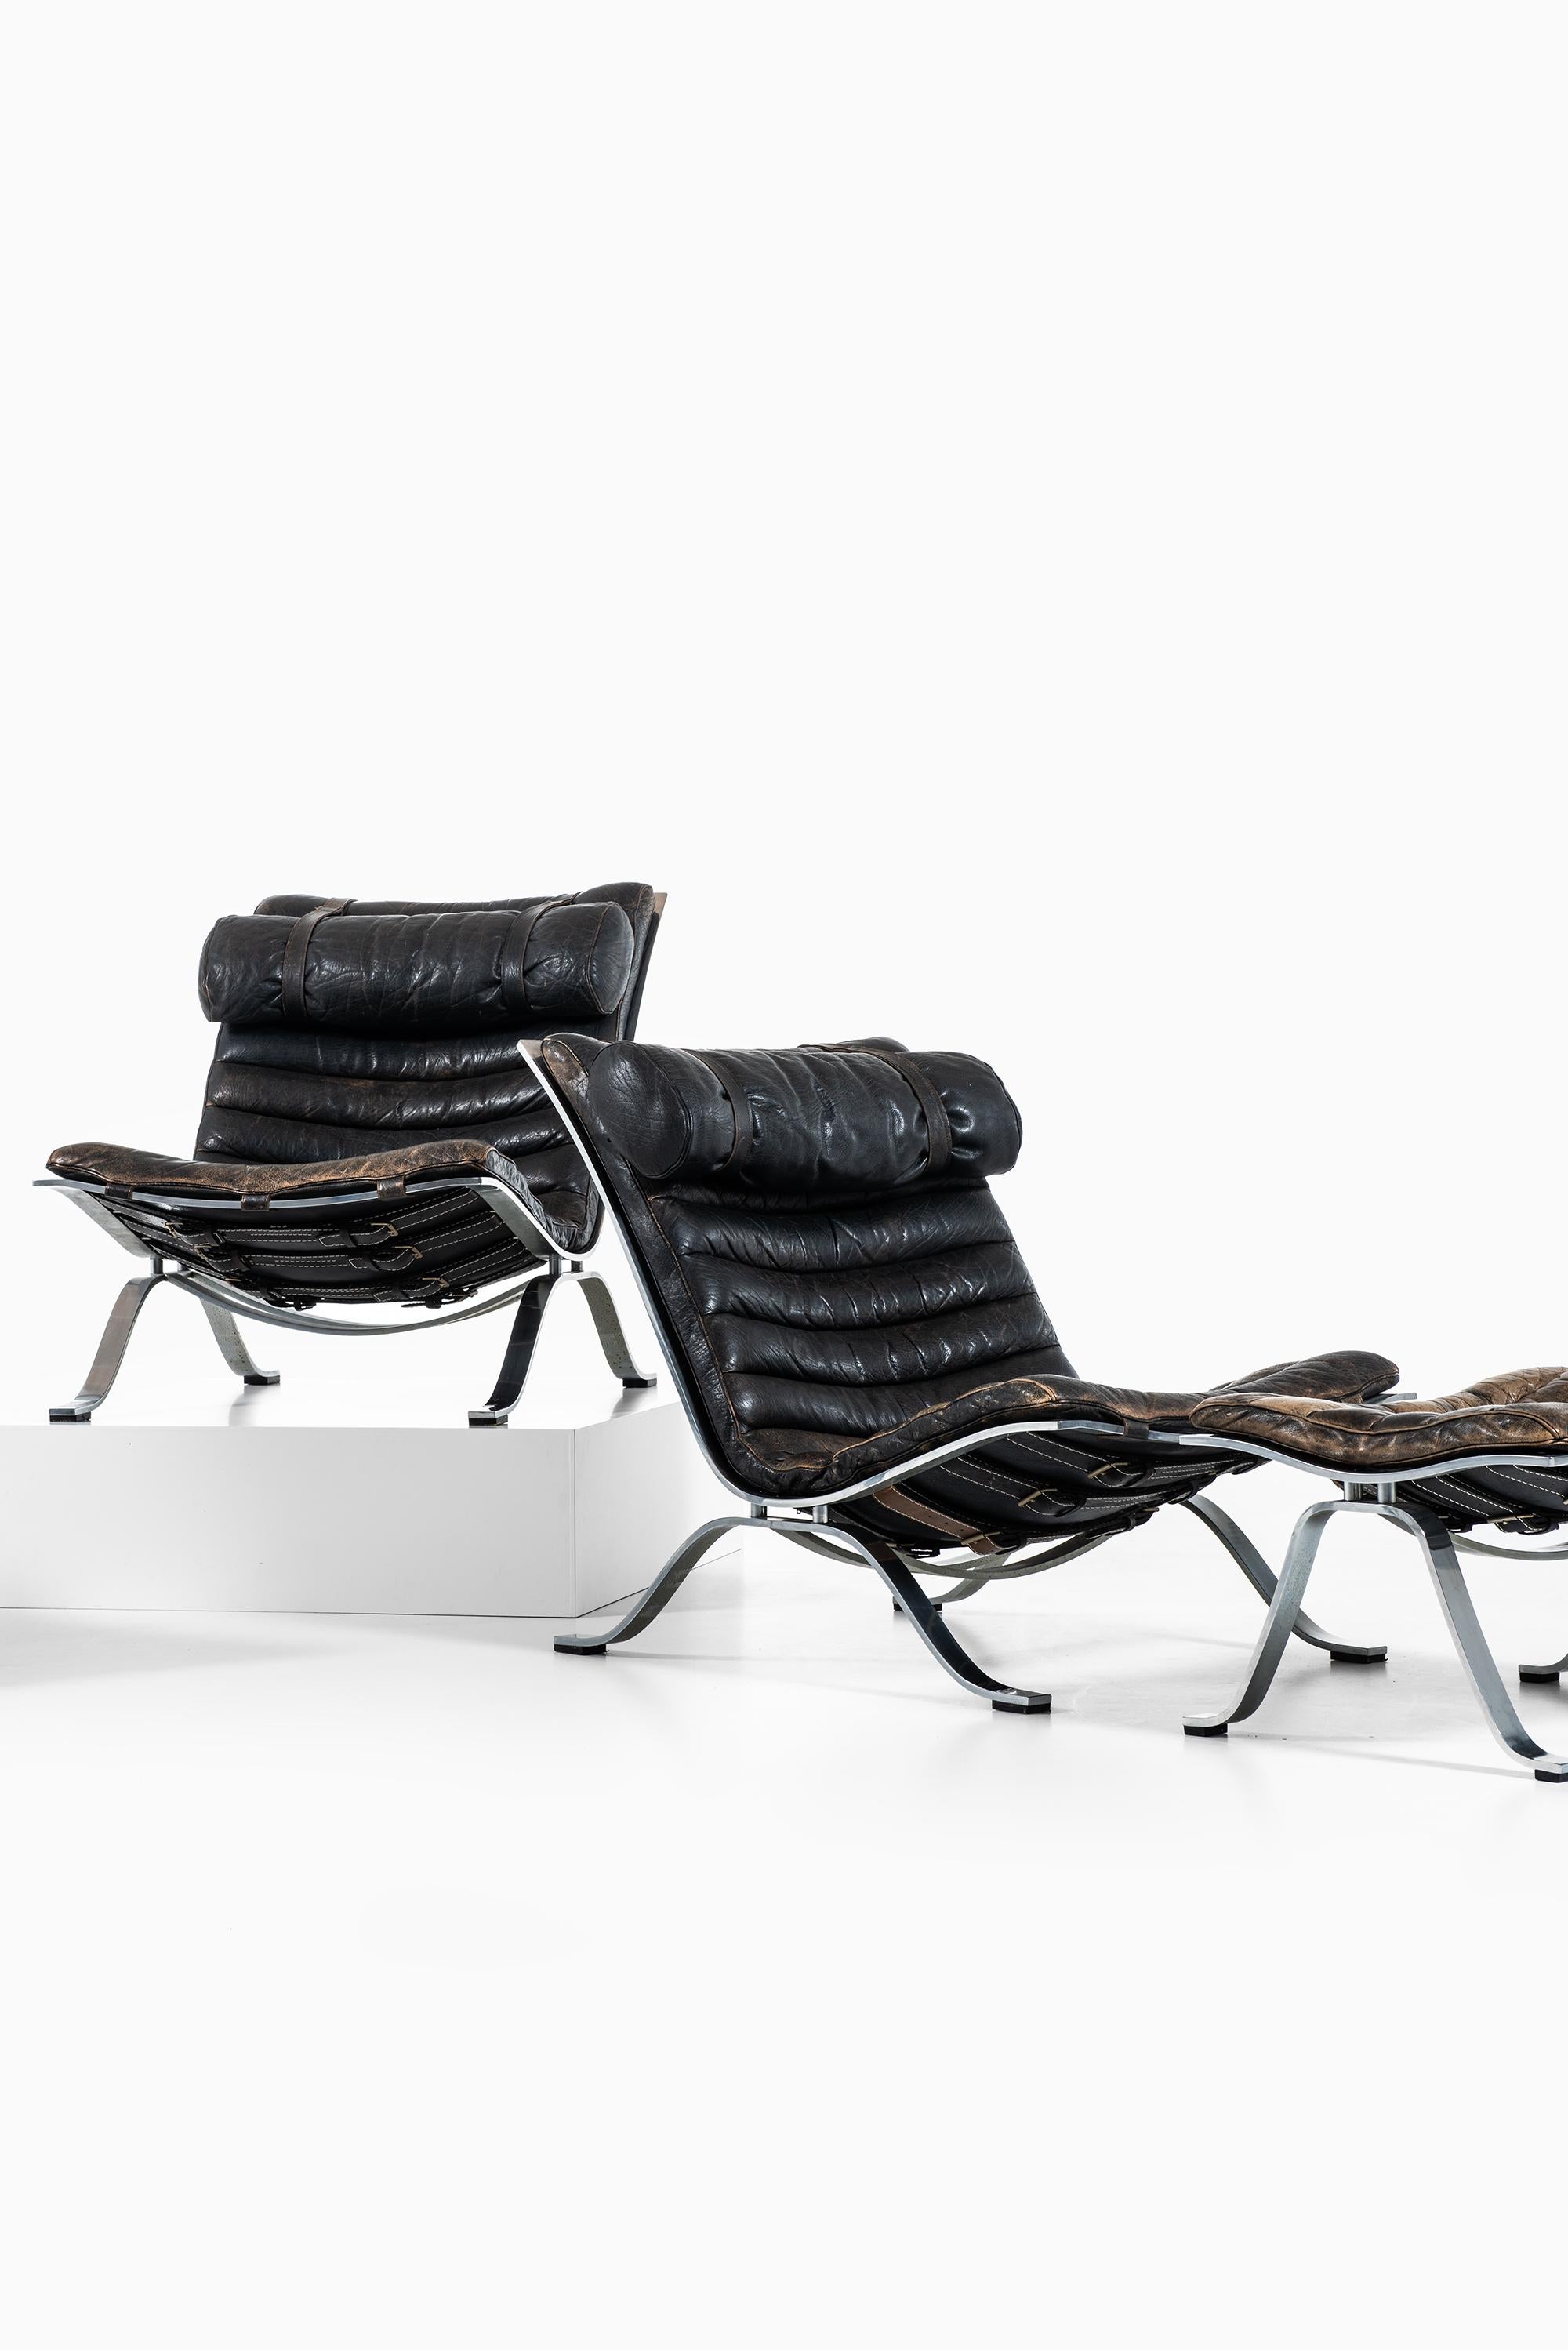 Steel Arne Norell Easy Chairs Model Ari Produced by Arne Norell AB in Sweden